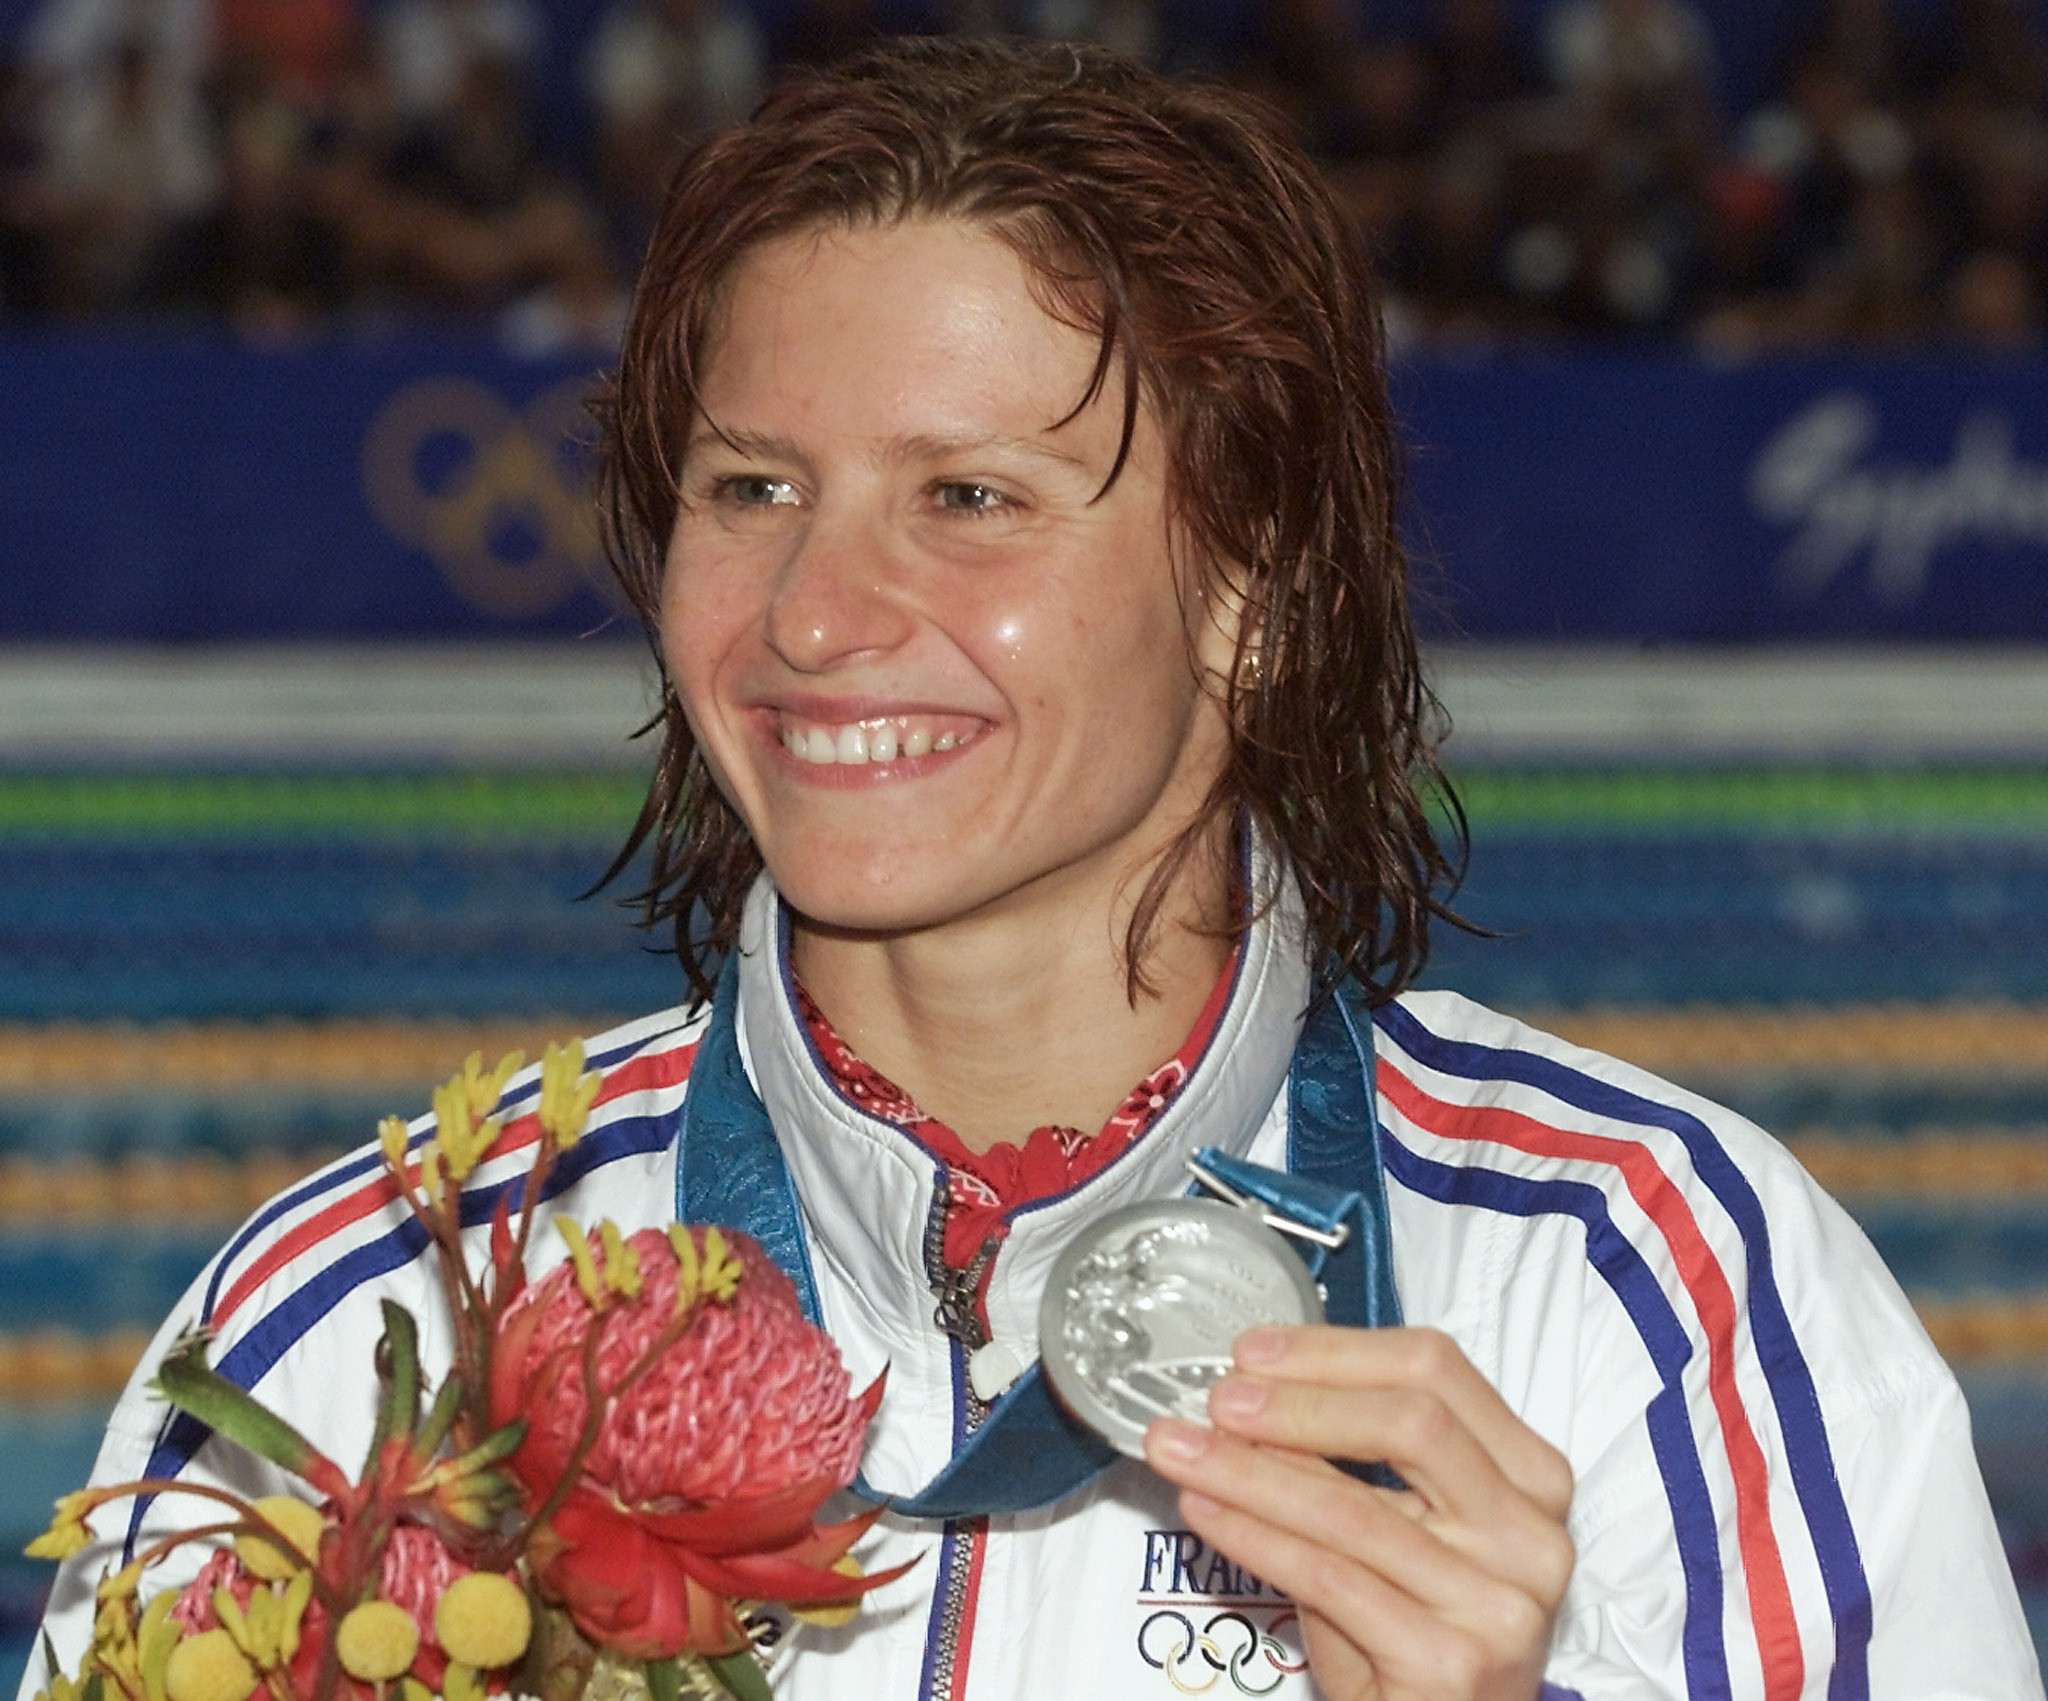 Roxana Maracineanu, who won a silver medal at Sydney 2000, will replace Flessel as French Sports Minister ©Getty Images